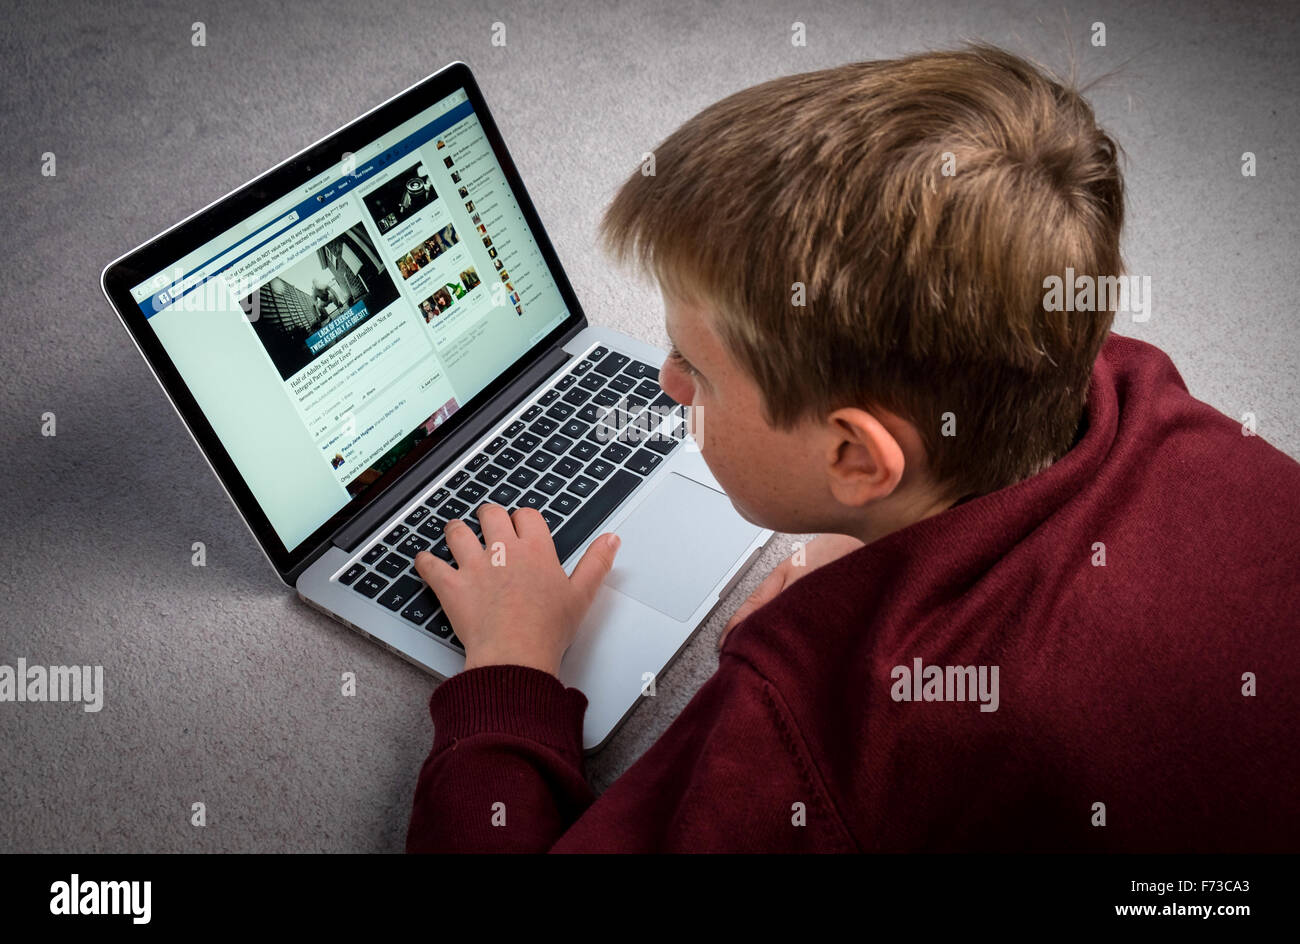 A boy looking at Facebook on a laptop computer Stock Photo